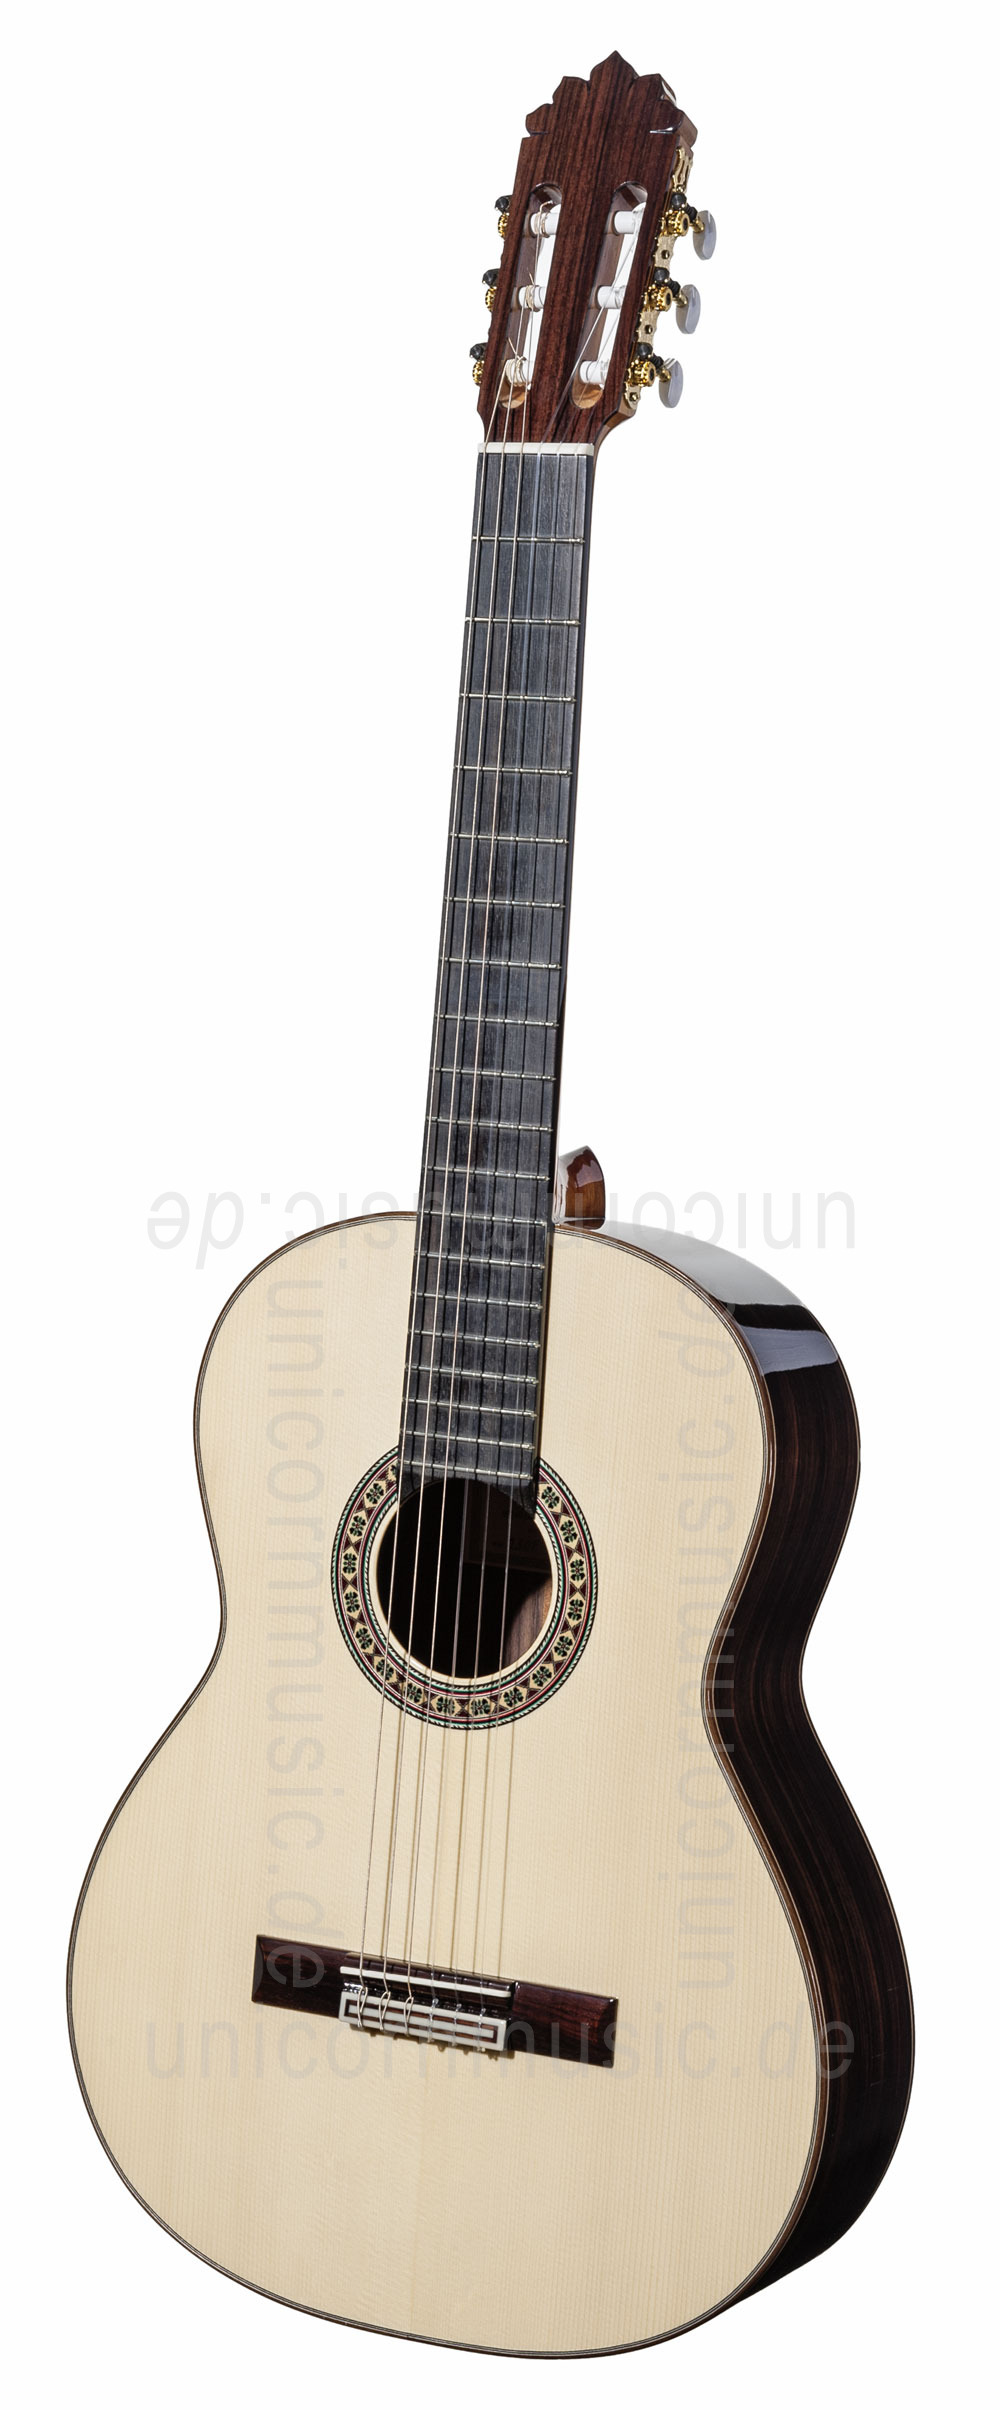 to article description / price Spanish Classical Guitar JOAN CASHIMIRA MODEL 130 Spruce - solid spruce top